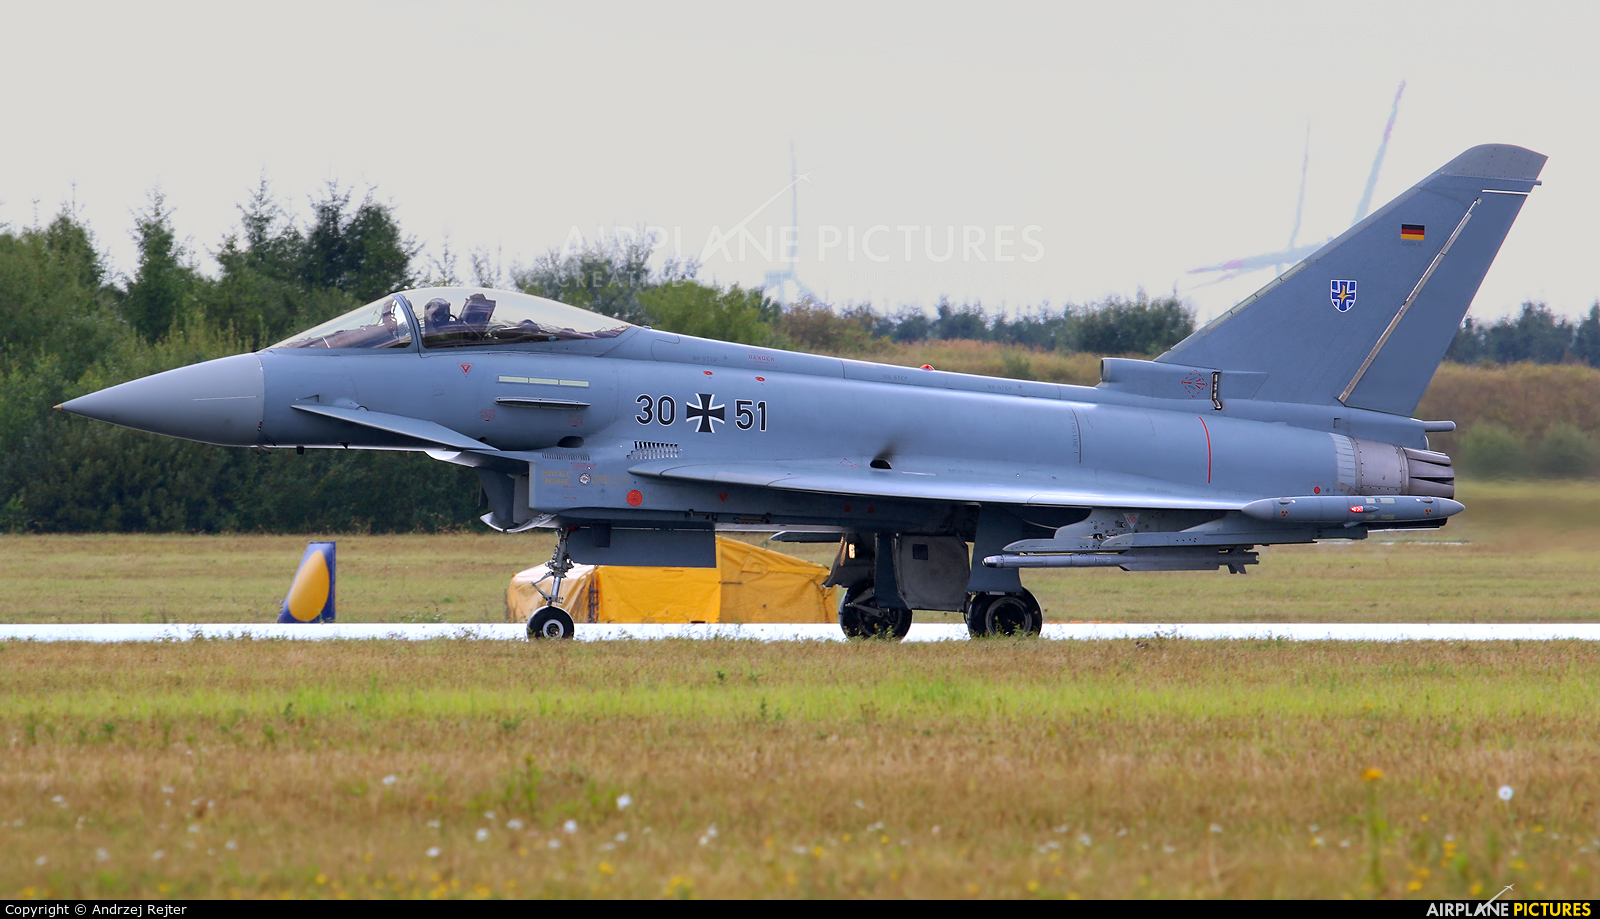 Germany - Air Force 30+51 aircraft at Rostock - Laage